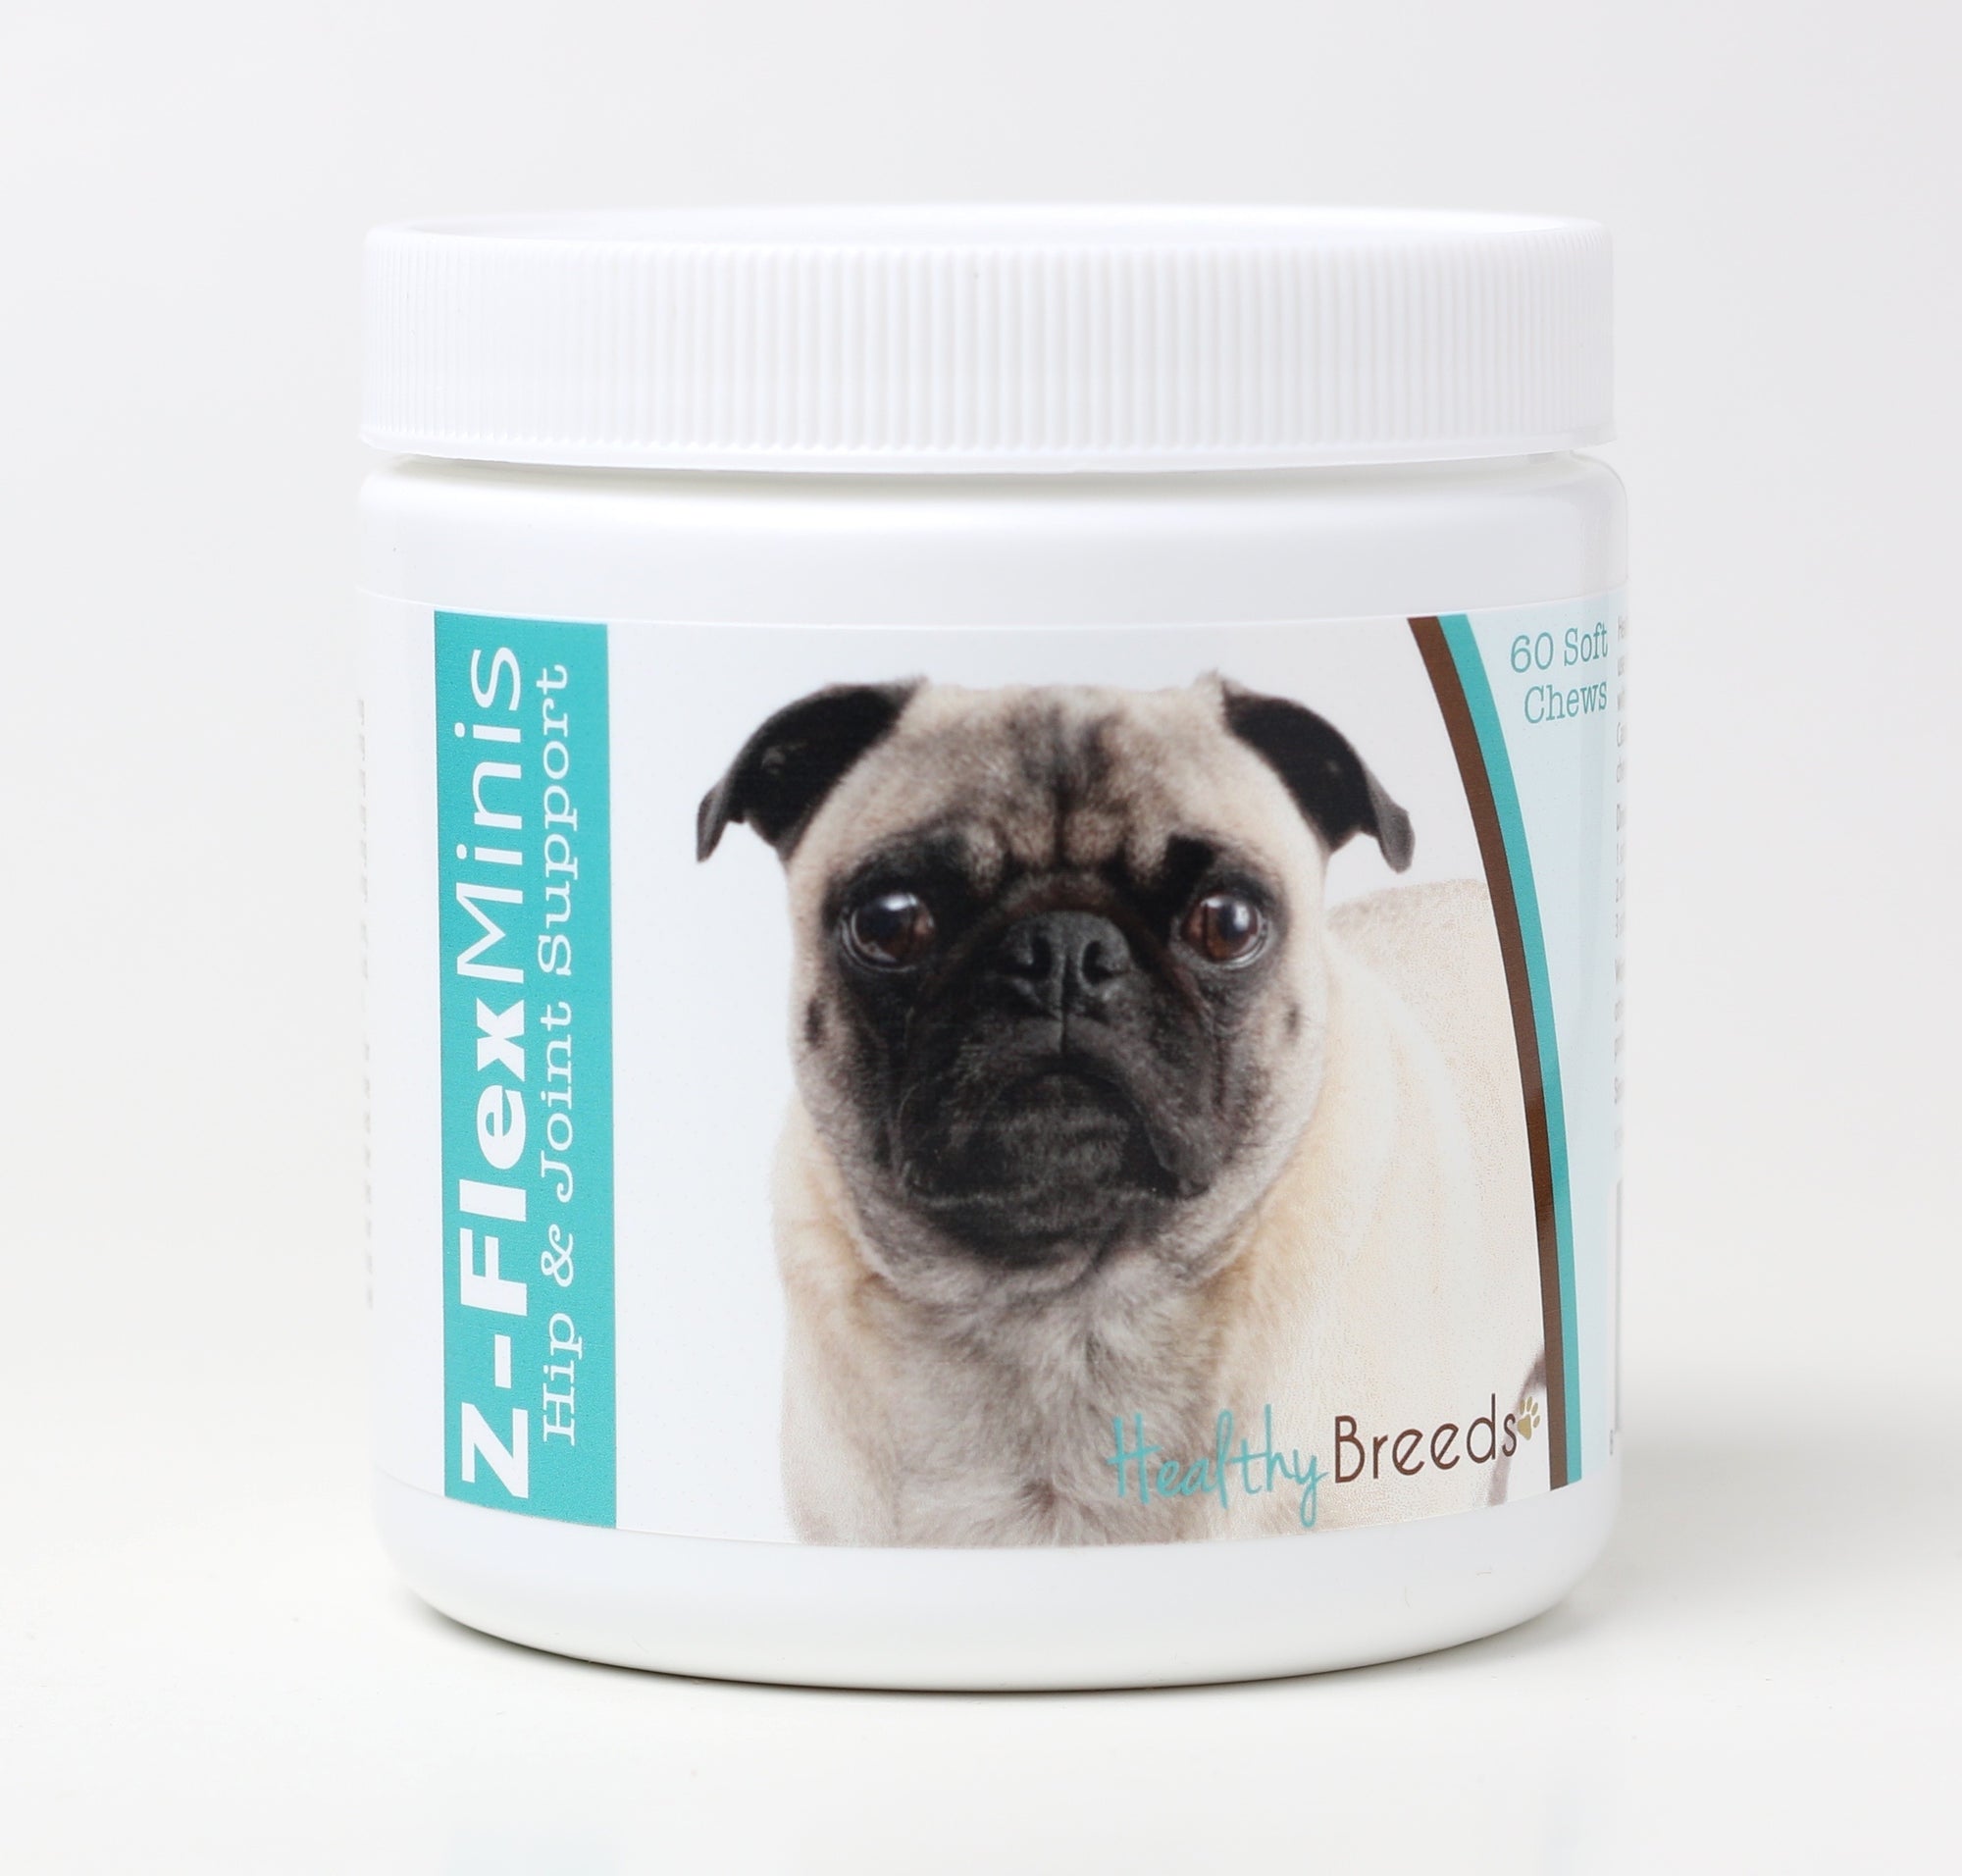 Healthy Breeds Pug Z-Flex Minis Hip and Joint Support Soft Chews 60 Count